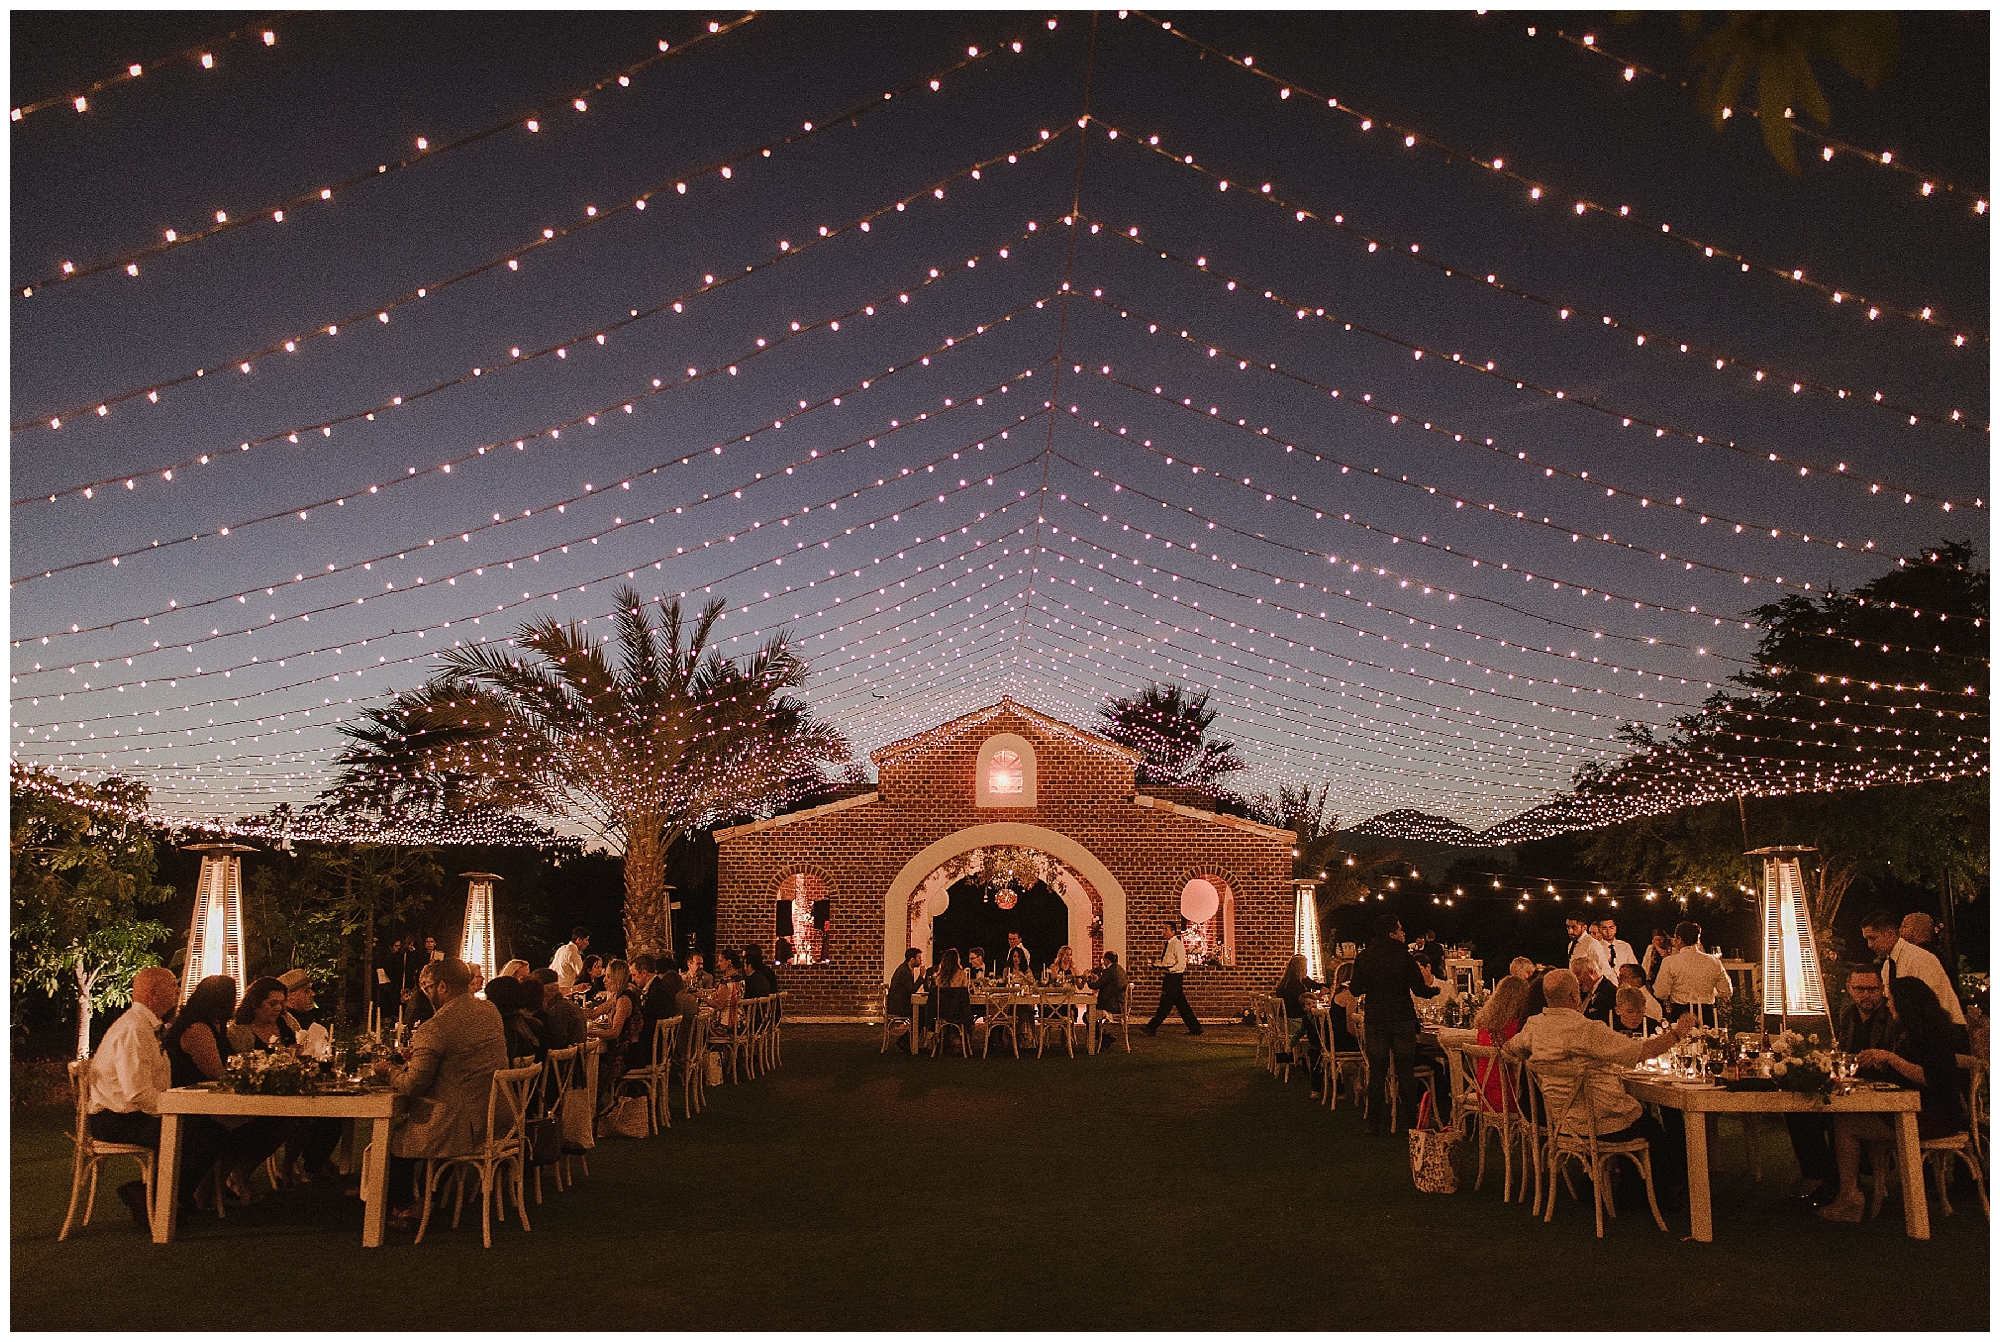 Wow - the lighting looks like stars in the sky - truly a beautiful Cabo wedding celebration